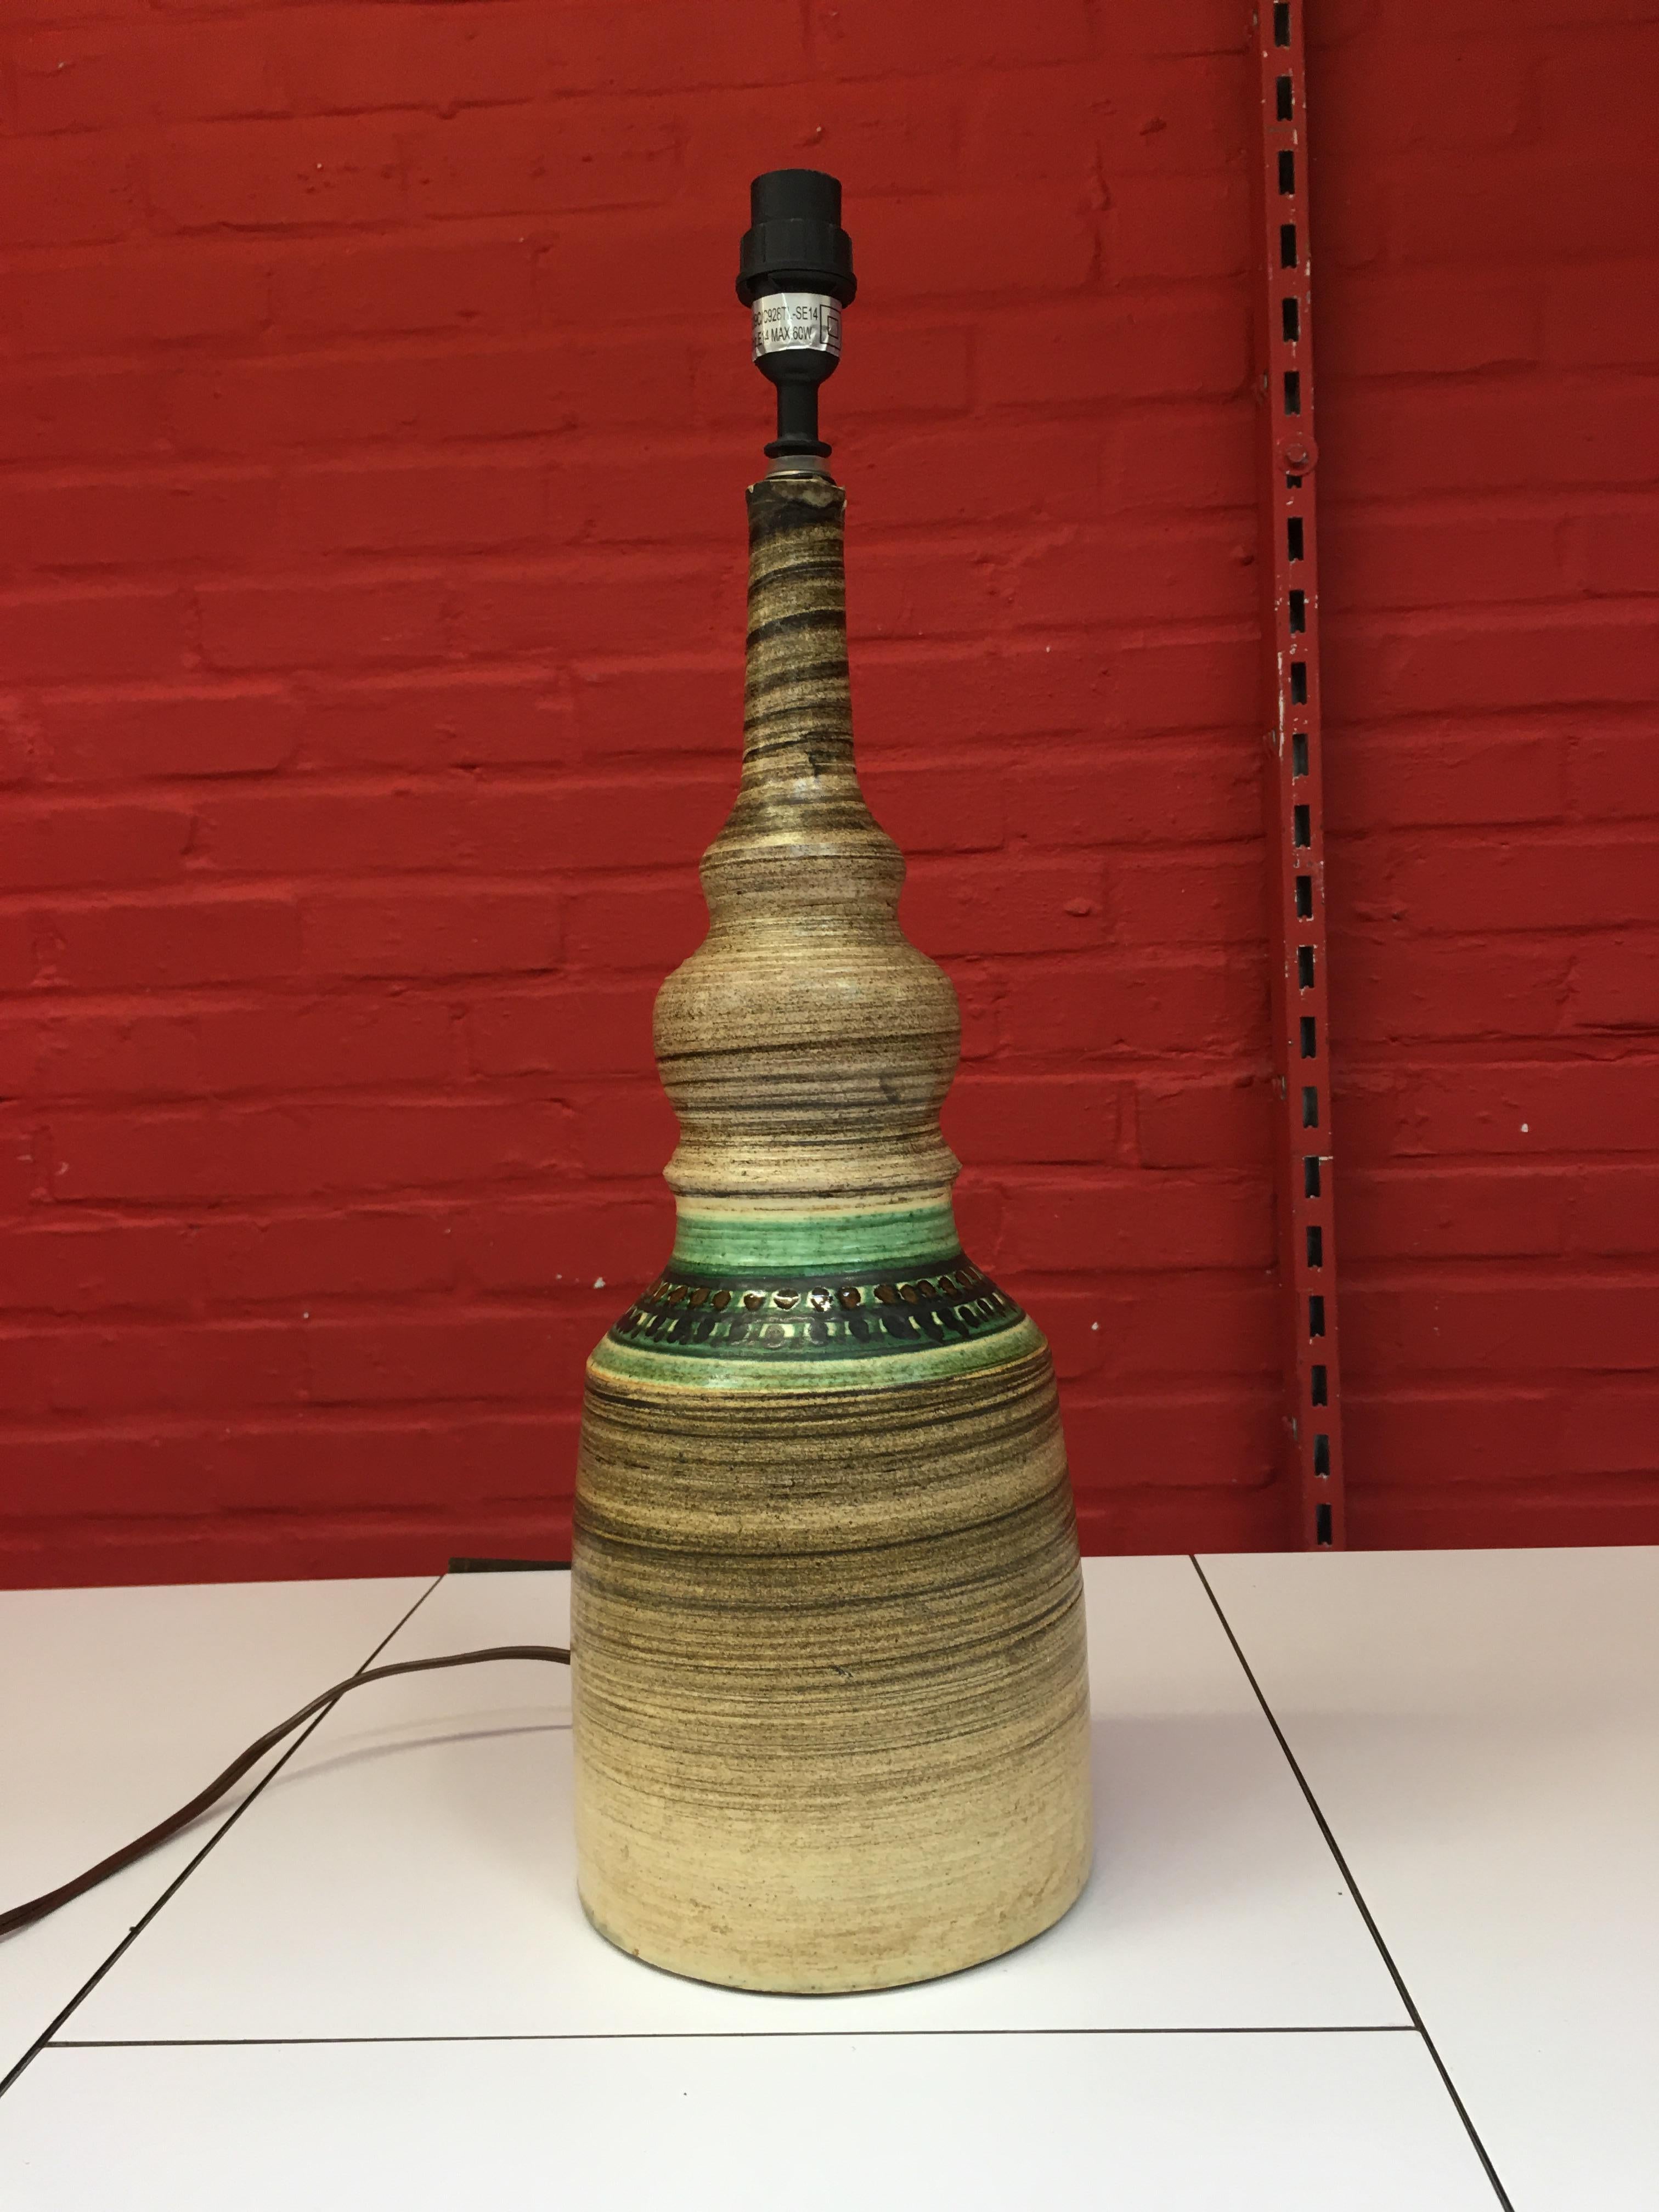 Ceramic lamp in the style of Georges Pelletier, or Accolay circa 1950/1960.